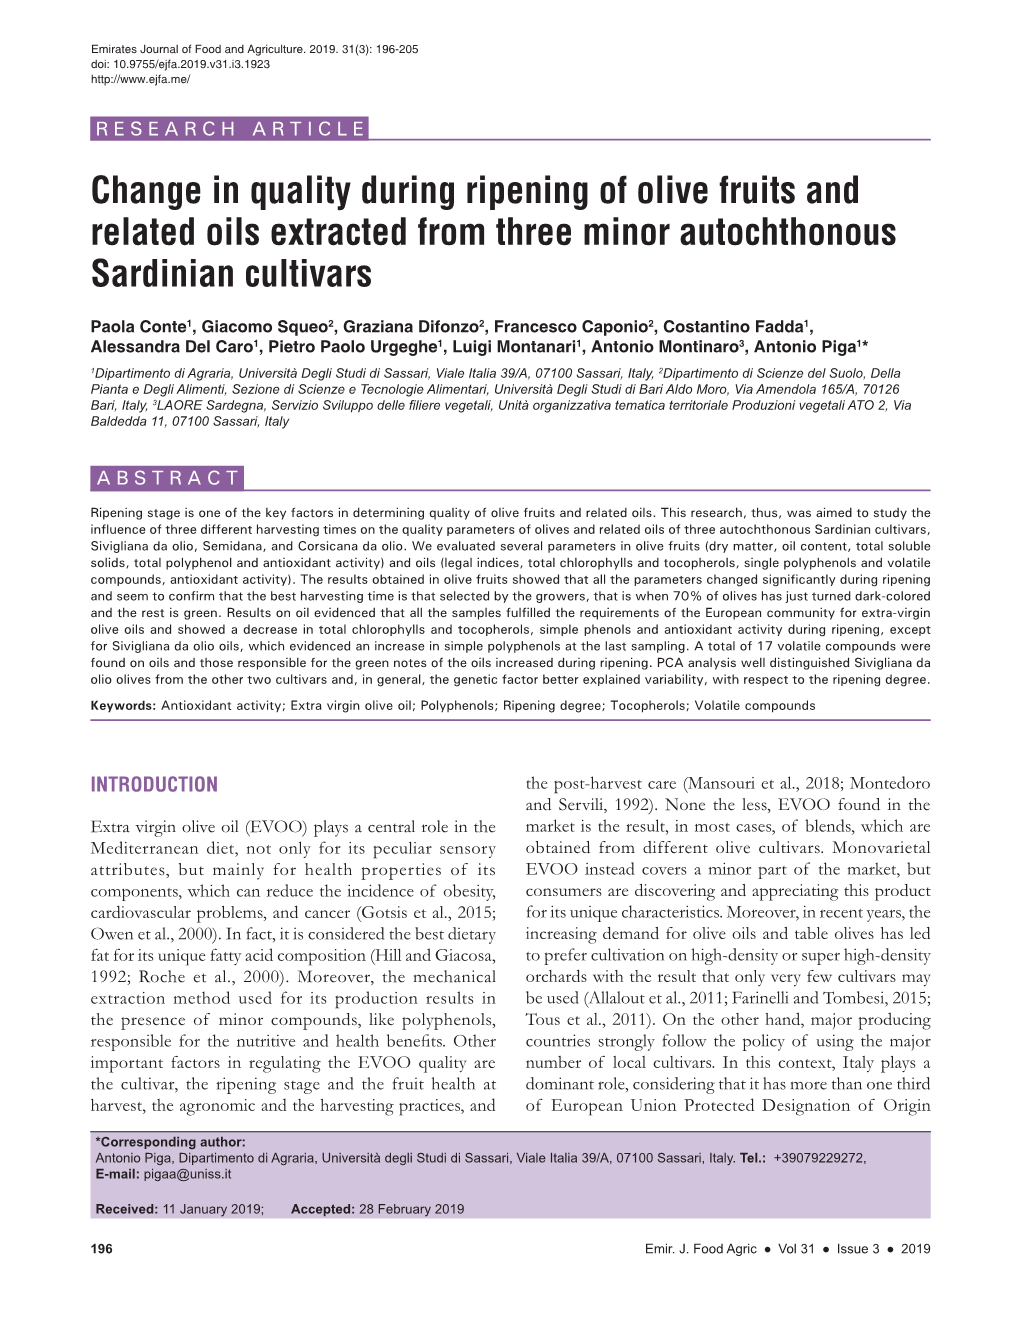 Change in Quality During Ripening of Olive Fruits and Related Oils Extracted from Three Minor Autochthonous Sardinian Cultivars